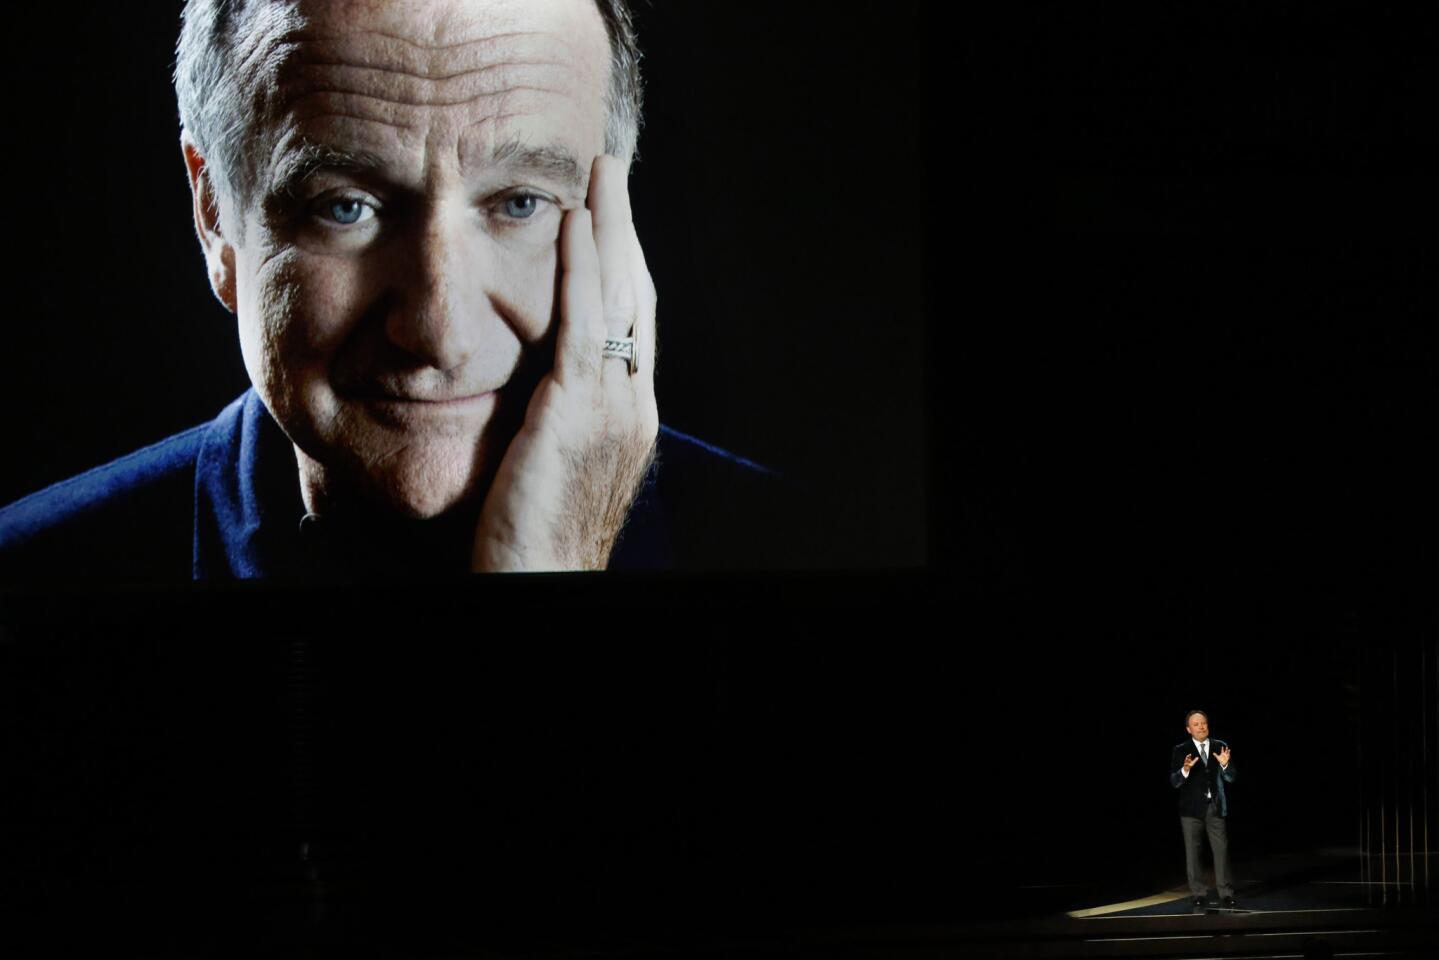 Comedian Billy Crystal pays tribute to the late Robin Williams onstage during the 66th Annual Primetime Emmy Awards at Nokia Theatre L.A. LIVE.